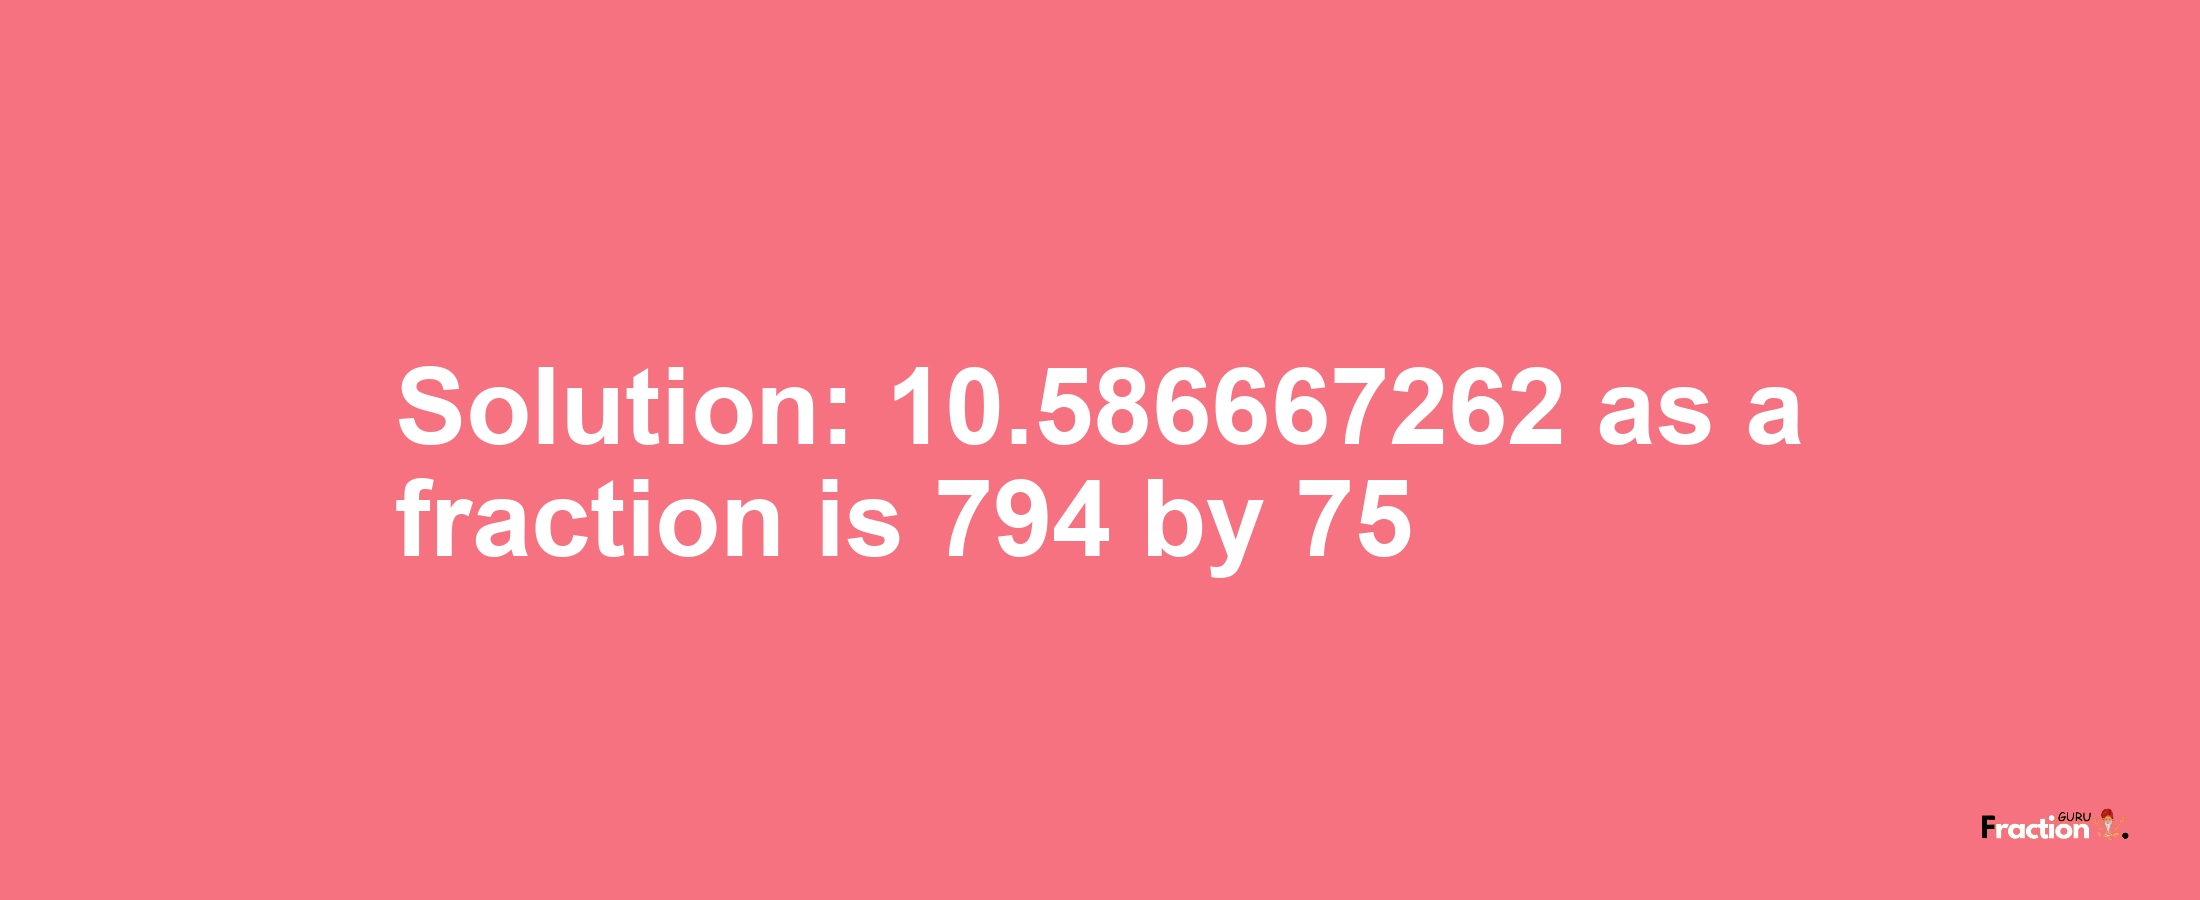 Solution:10.586667262 as a fraction is 794/75